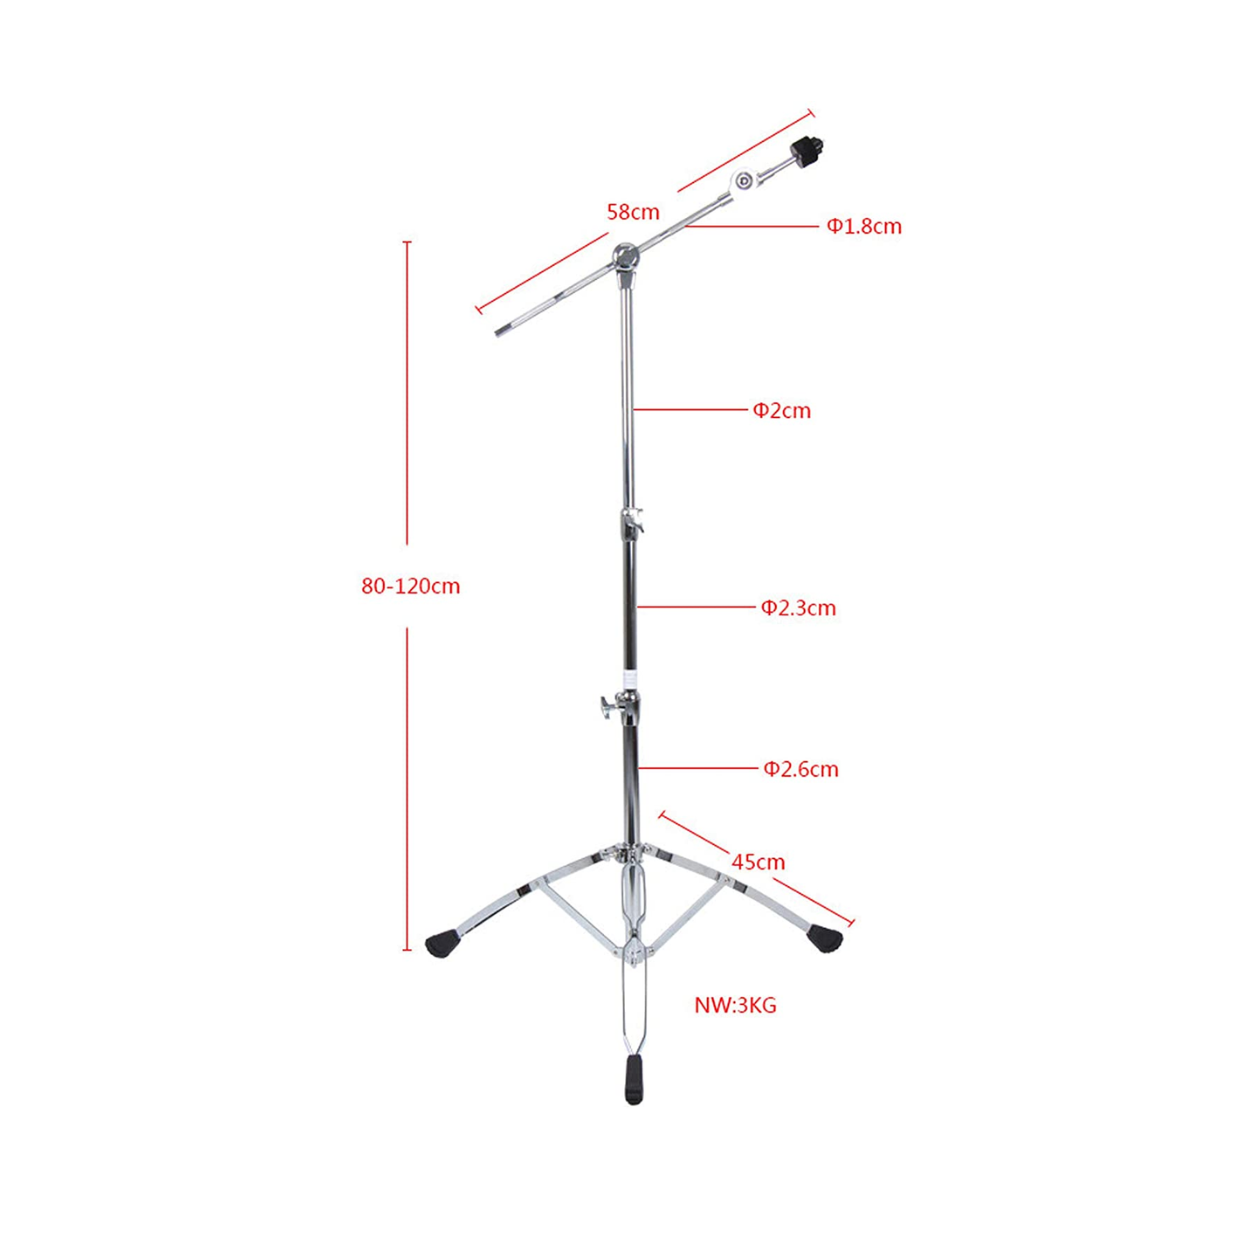 NEOWOOD G410 BOOM CYMBAL STAND